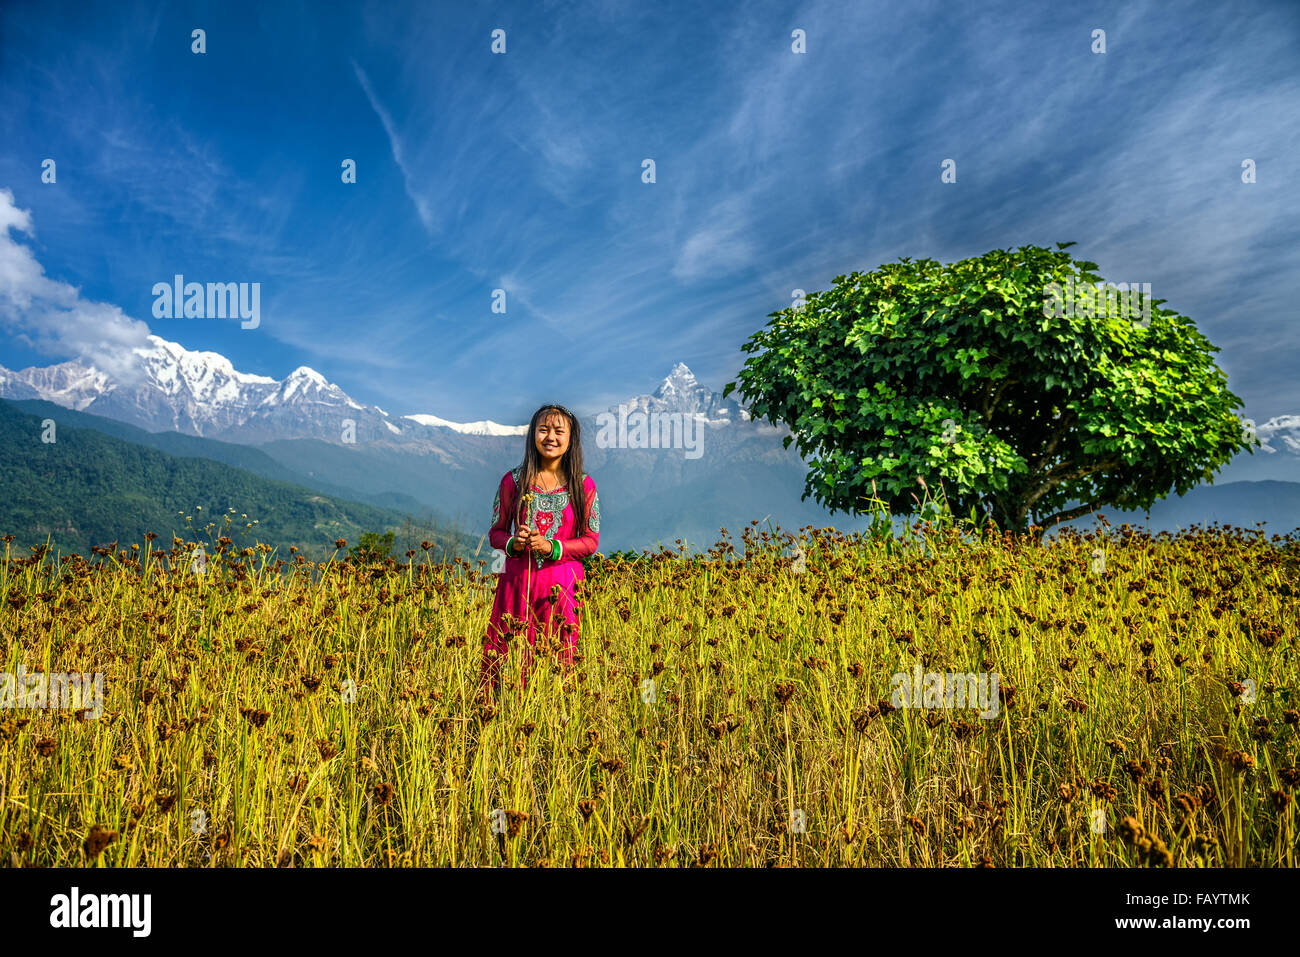 Young girl plays on a field in the Himalayas mountains near Pokhara Stock Photo